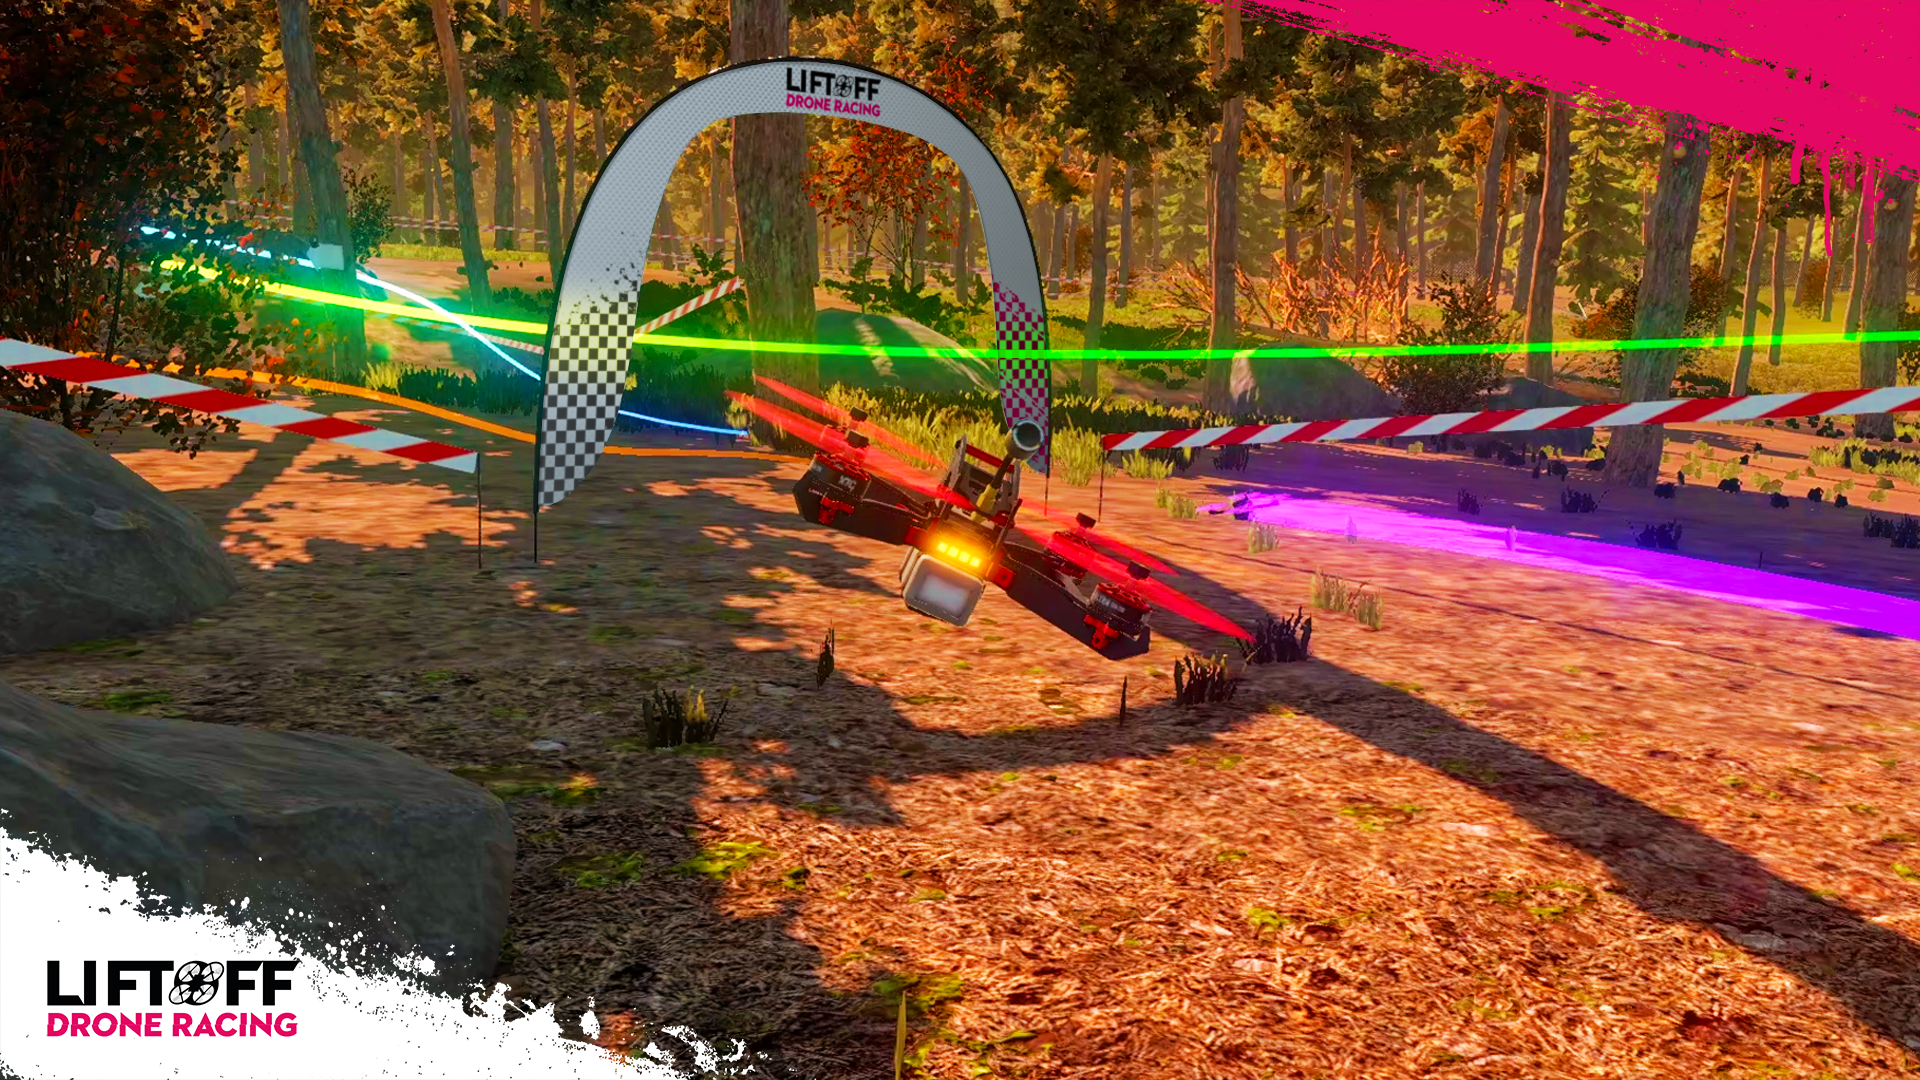 Liftoff: Drone Racing Heading to Xbox One and PS4, New Trailer